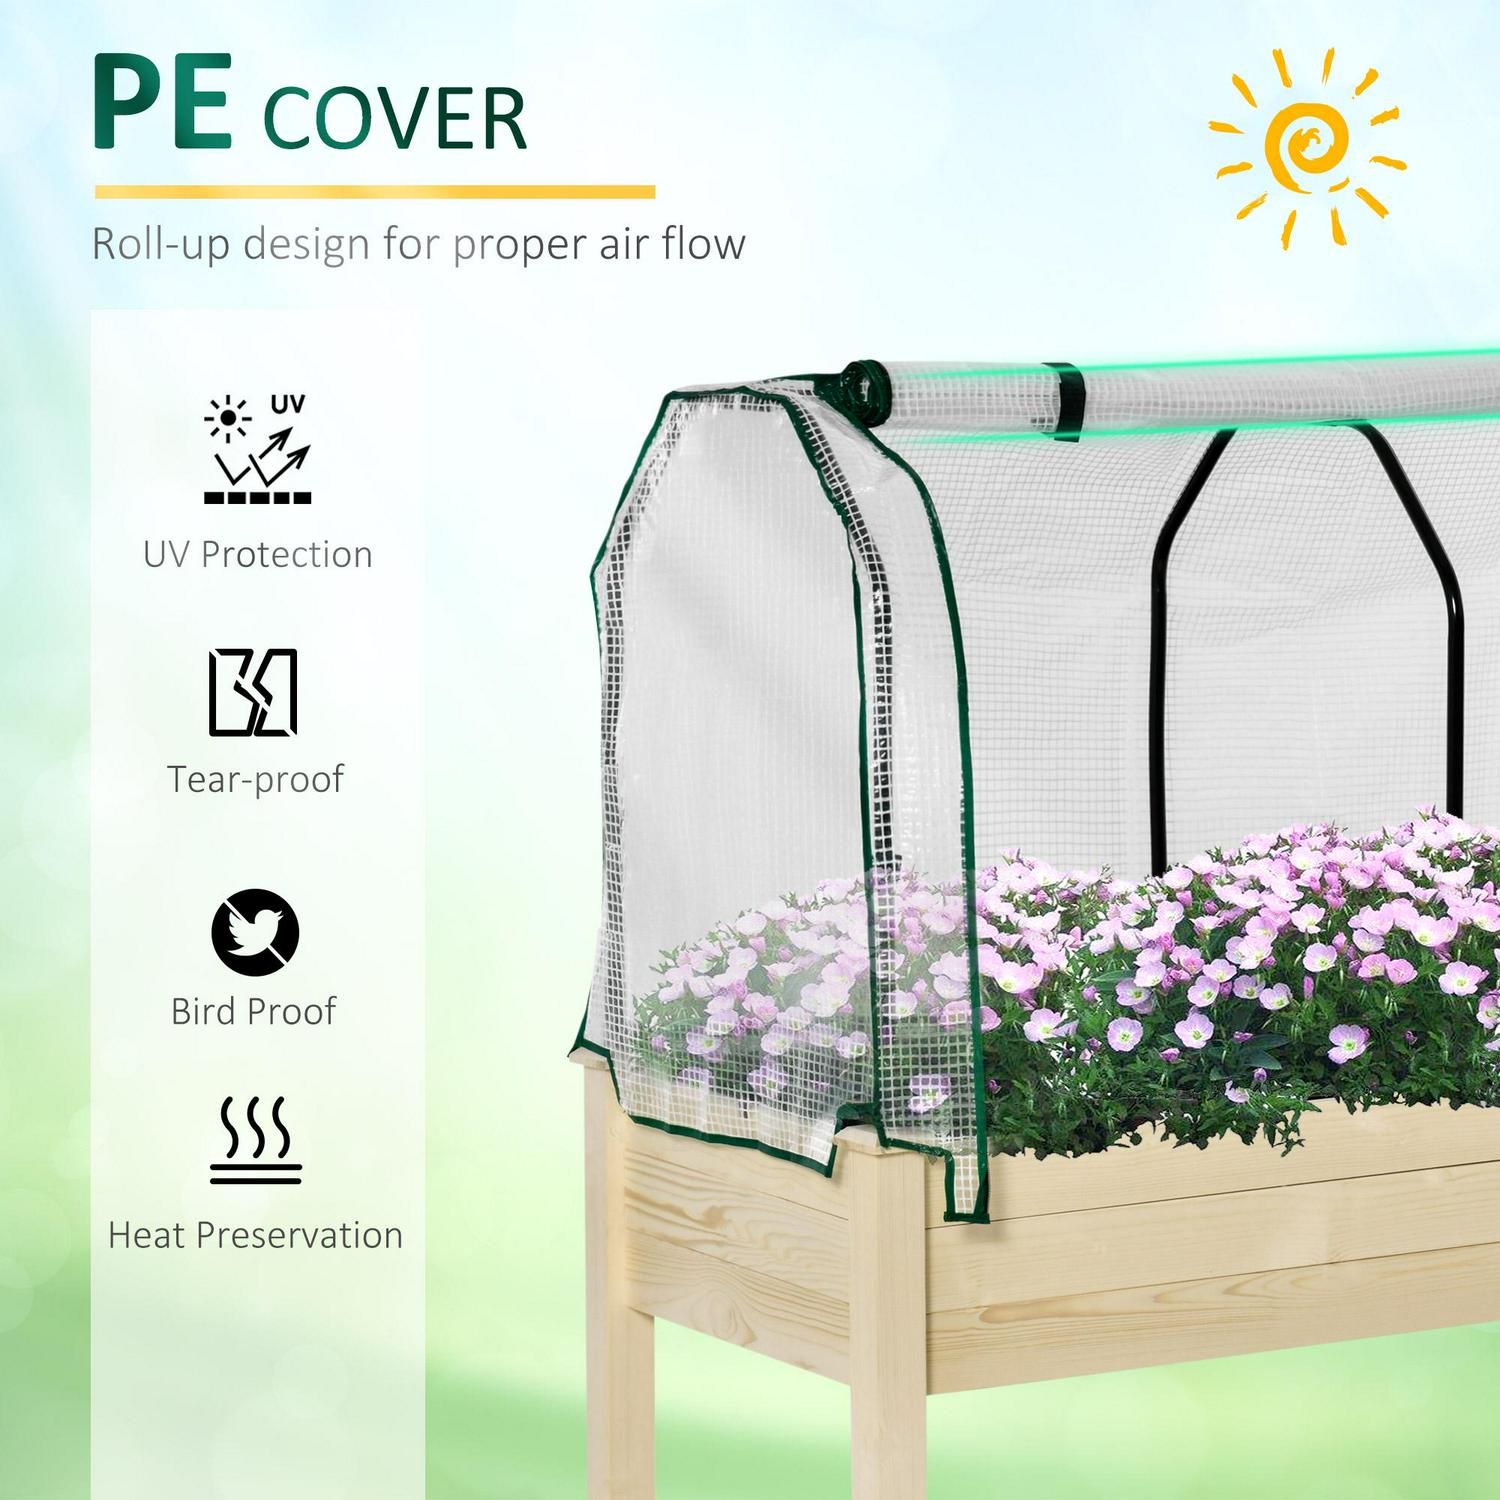 Raised Garden Bed Outdoor Elevated Wood Planter Box W/ PE Cover, Natural